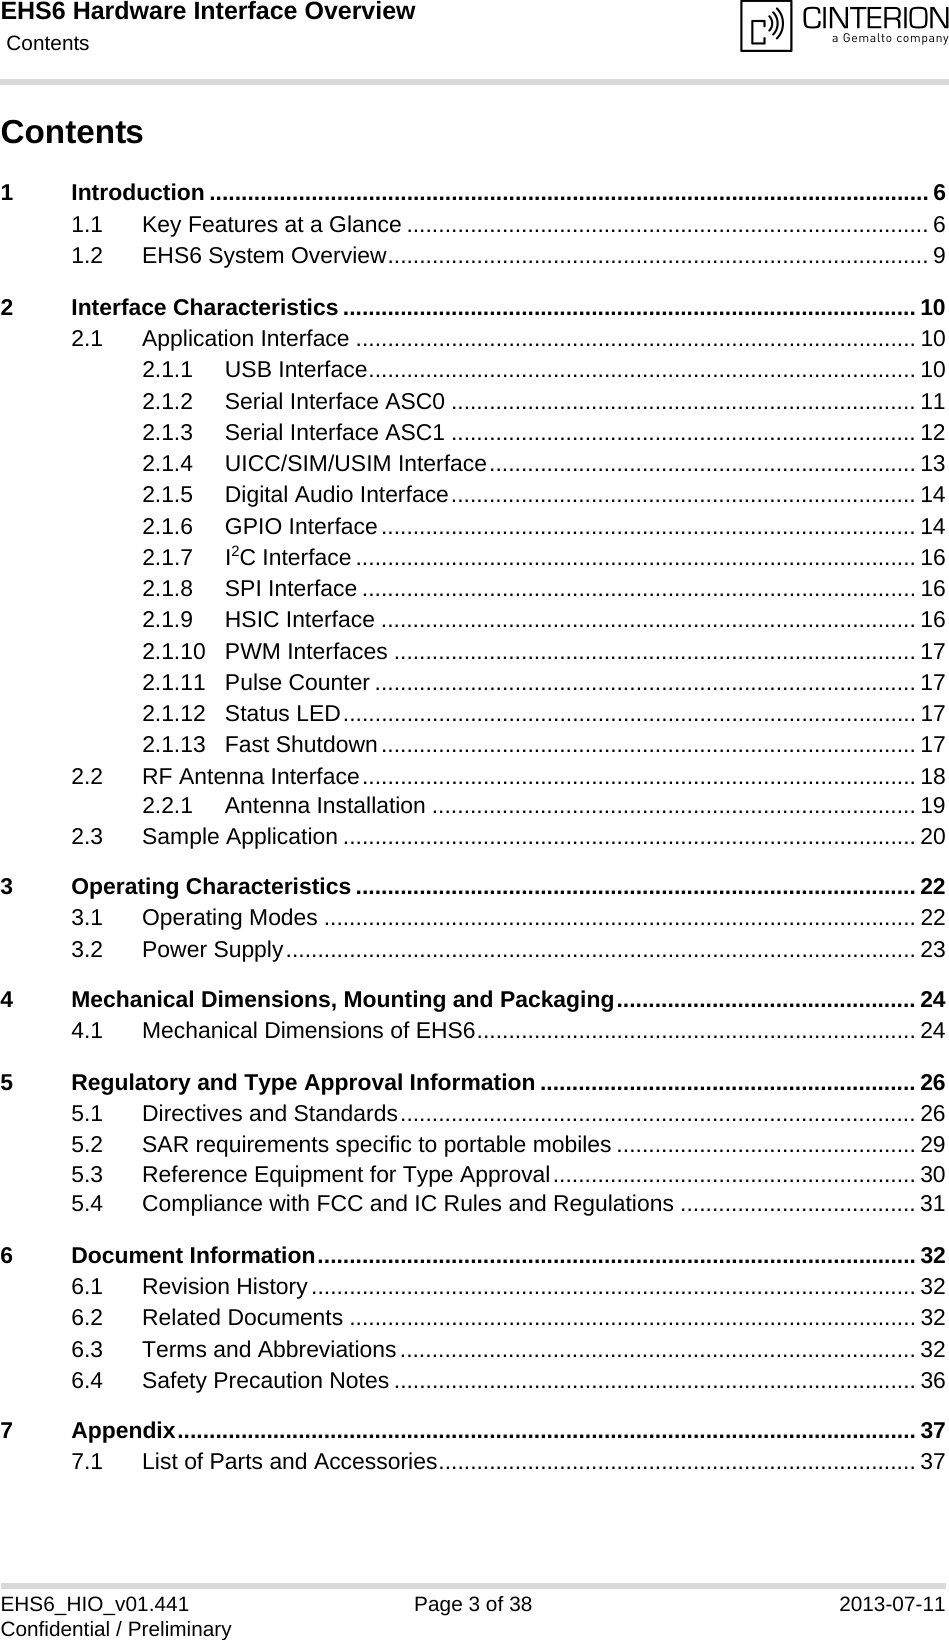 EHS6 Hardware Interface Overview Contents38EHS6_HIO_v01.441 Page 3 of 38 2013-07-11Confidential / PreliminaryContents1 Introduction ................................................................................................................. 61.1 Key Features at a Glance .................................................................................. 61.2 EHS6 System Overview..................................................................................... 92 Interface Characteristics .......................................................................................... 102.1 Application Interface ........................................................................................ 102.1.1 USB Interface...................................................................................... 102.1.2 Serial Interface ASC0 ......................................................................... 112.1.3 Serial Interface ASC1 ......................................................................... 122.1.4 UICC/SIM/USIM Interface................................................................... 132.1.5 Digital Audio Interface......................................................................... 142.1.6 GPIO Interface.................................................................................... 142.1.7 I2C Interface ........................................................................................ 162.1.8 SPI Interface ....................................................................................... 162.1.9 HSIC Interface .................................................................................... 162.1.10 PWM Interfaces .................................................................................. 172.1.11 Pulse Counter ..................................................................................... 172.1.12 Status LED.......................................................................................... 172.1.13 Fast Shutdown.................................................................................... 172.2 RF Antenna Interface....................................................................................... 182.2.1 Antenna Installation ............................................................................ 192.3 Sample Application .......................................................................................... 203 Operating Characteristics ........................................................................................ 223.1 Operating Modes ............................................................................................. 223.2 Power Supply................................................................................................... 234 Mechanical Dimensions, Mounting and Packaging............................................... 244.1 Mechanical Dimensions of EHS6..................................................................... 245 Regulatory and Type Approval Information ........................................................... 265.1 Directives and Standards................................................................................. 265.2 SAR requirements specific to portable mobiles ............................................... 295.3 Reference Equipment for Type Approval......................................................... 305.4 Compliance with FCC and IC Rules and Regulations ..................................... 316 Document Information.............................................................................................. 326.1 Revision History............................................................................................... 326.2 Related Documents ......................................................................................... 326.3 Terms and Abbreviations................................................................................. 326.4 Safety Precaution Notes .................................................................................. 367 Appendix.................................................................................................................... 377.1 List of Parts and Accessories........................................................................... 37